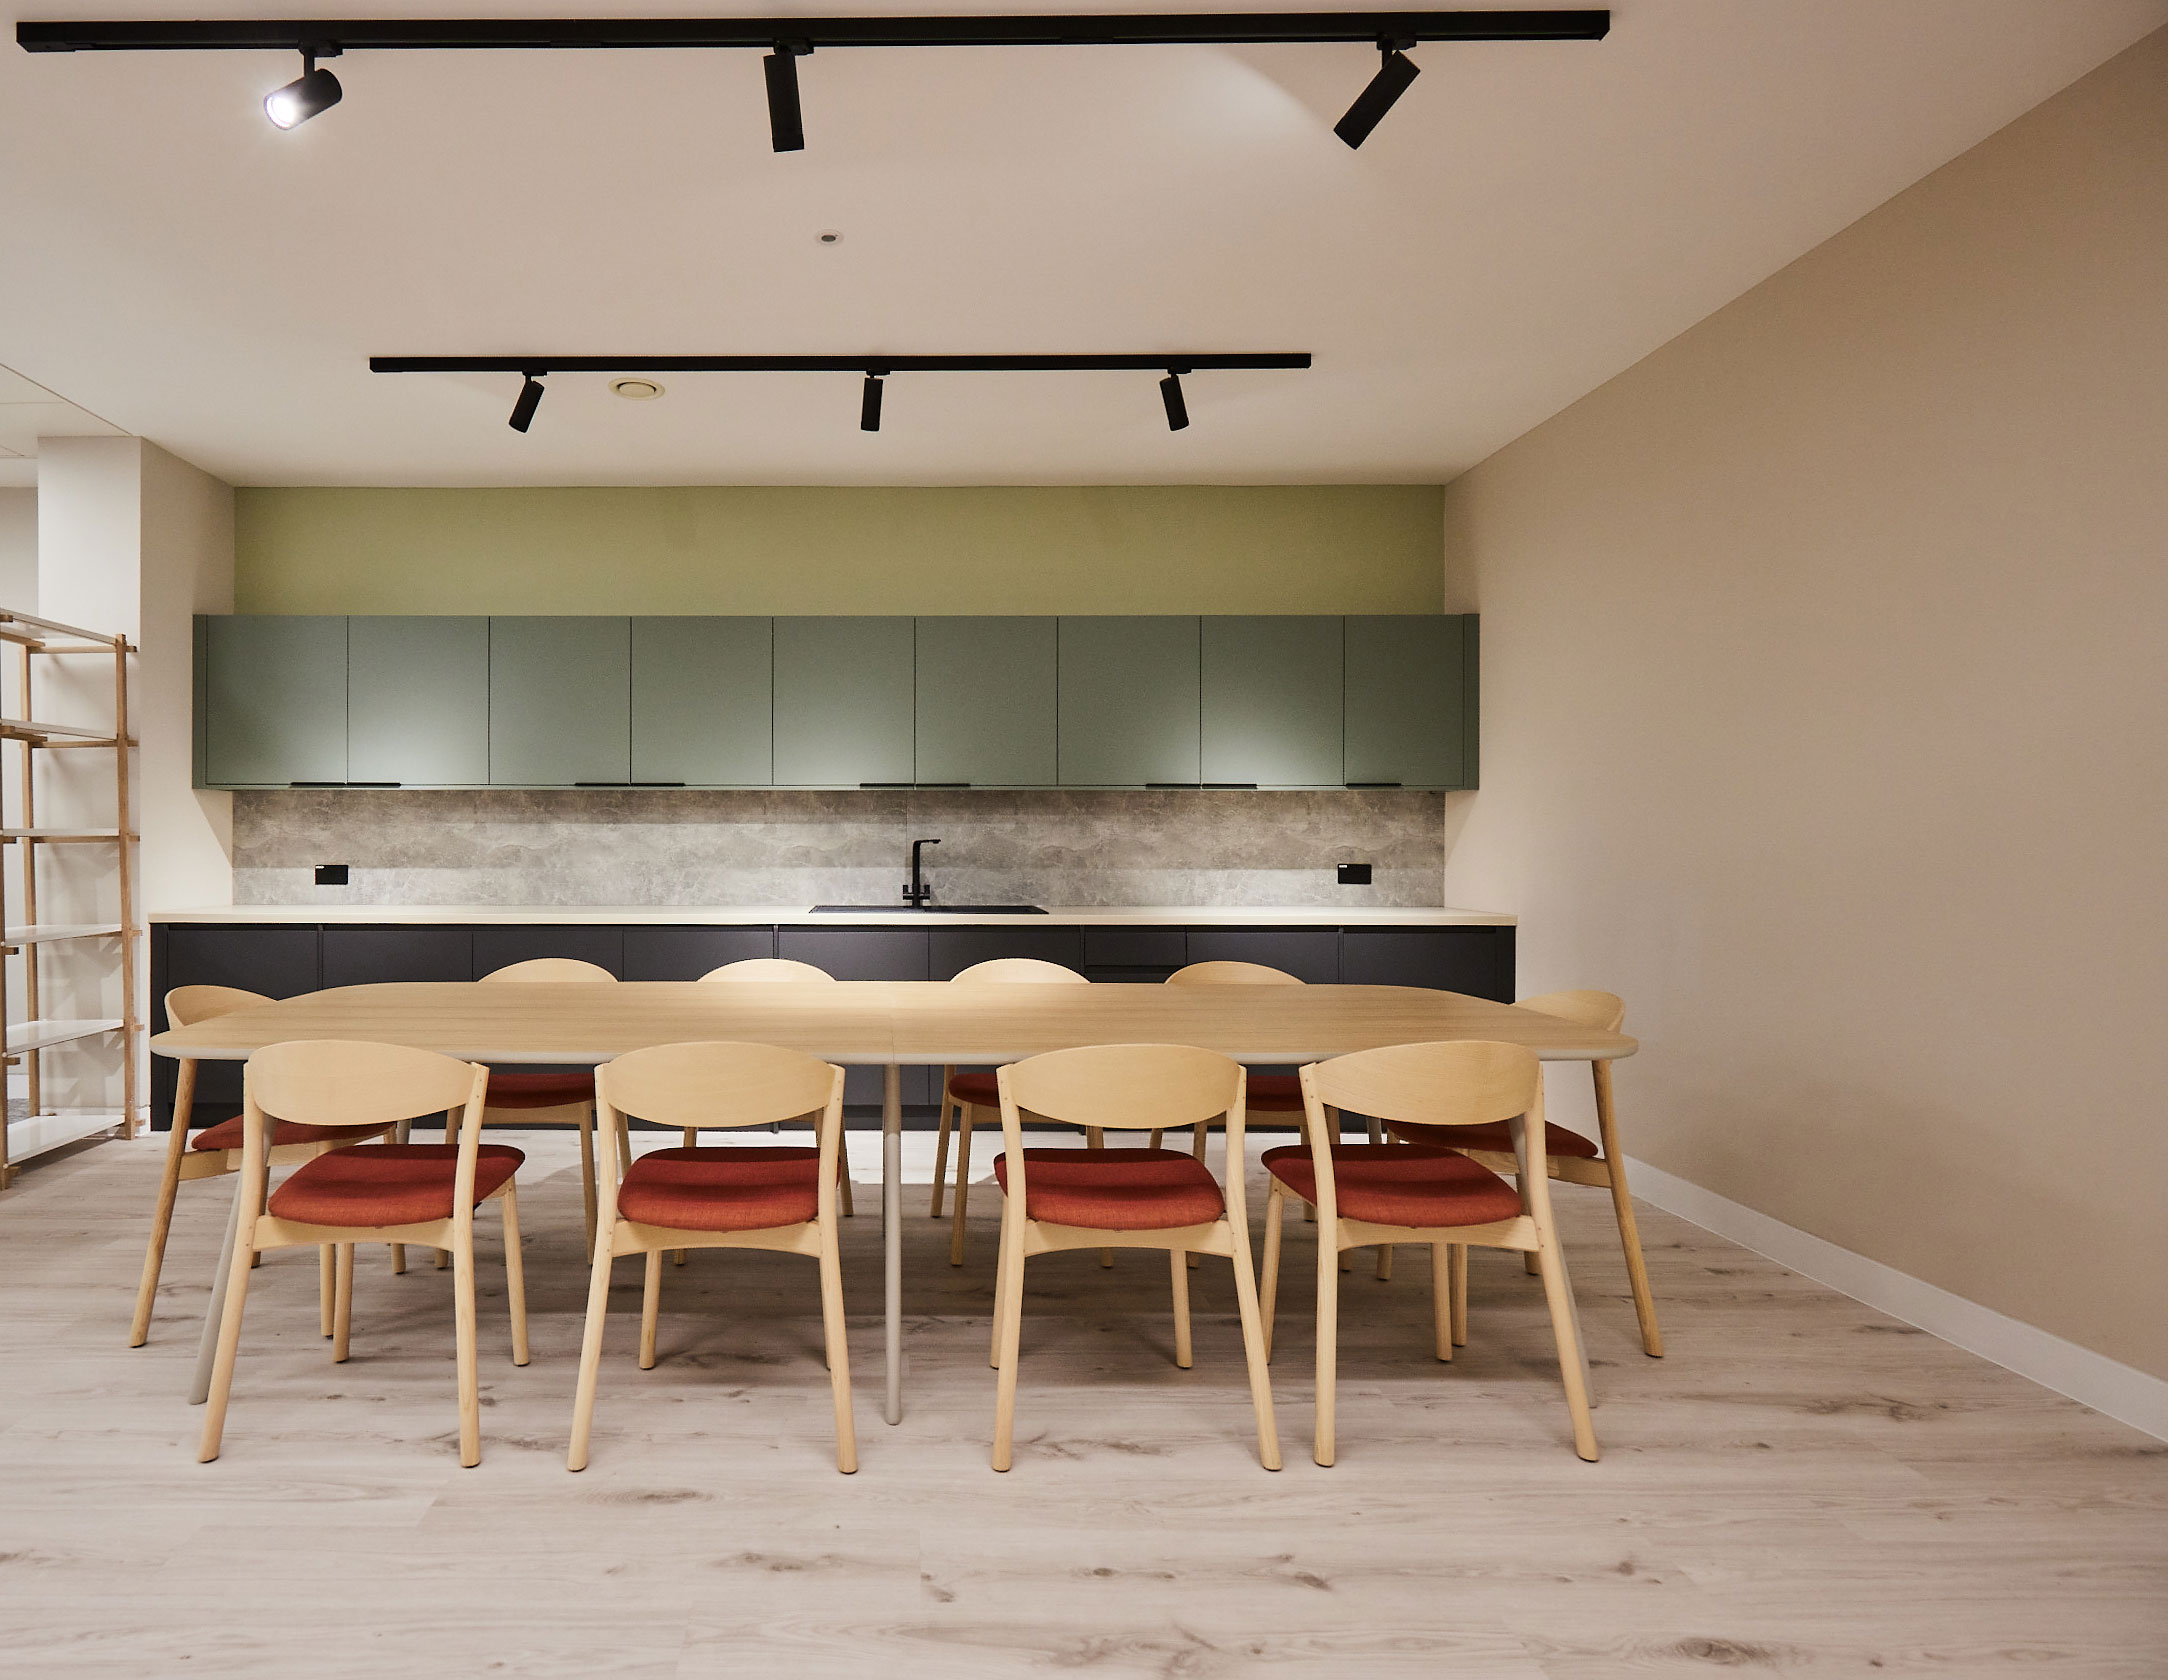 A large minimalistic wooden table and chairs fill a kitchen and office tea point area